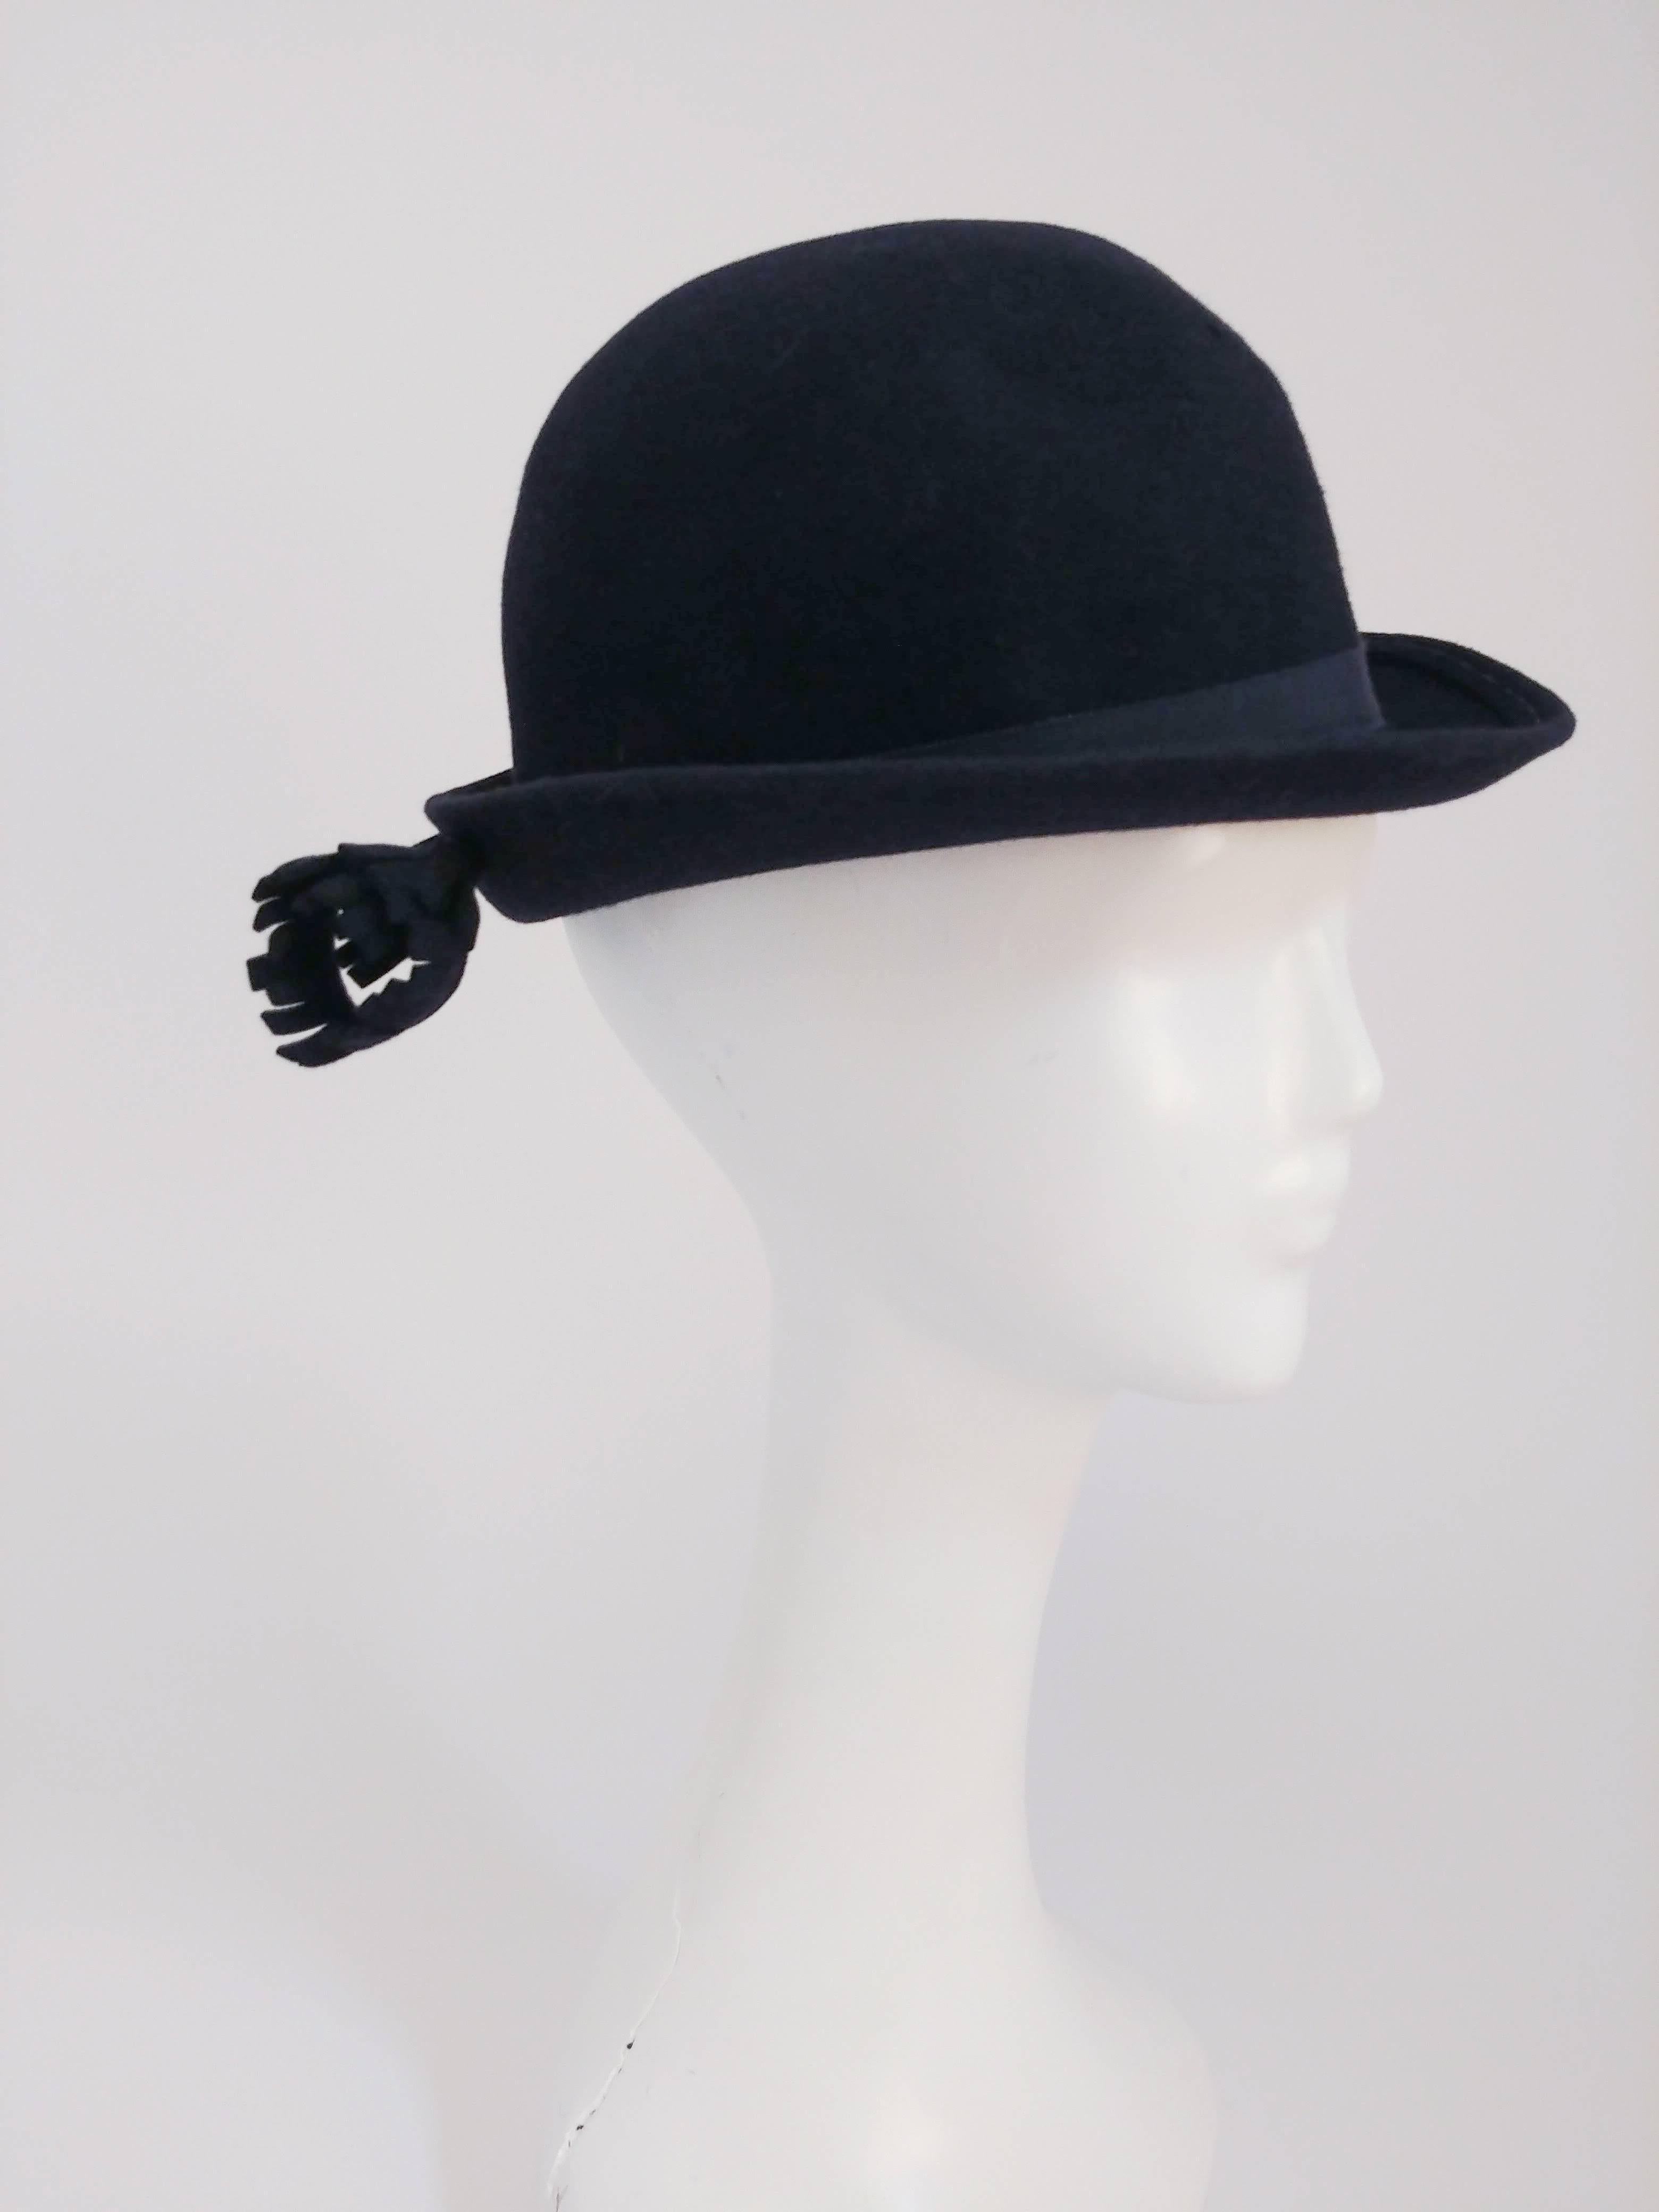 1960s Adolfo Navy Hat with Flower Accent. Navy Adolfo II for I. Magnin cashmere felt hat with grosgrain band and handmade flower accent near the back of the brim. 22+ inch circumference.